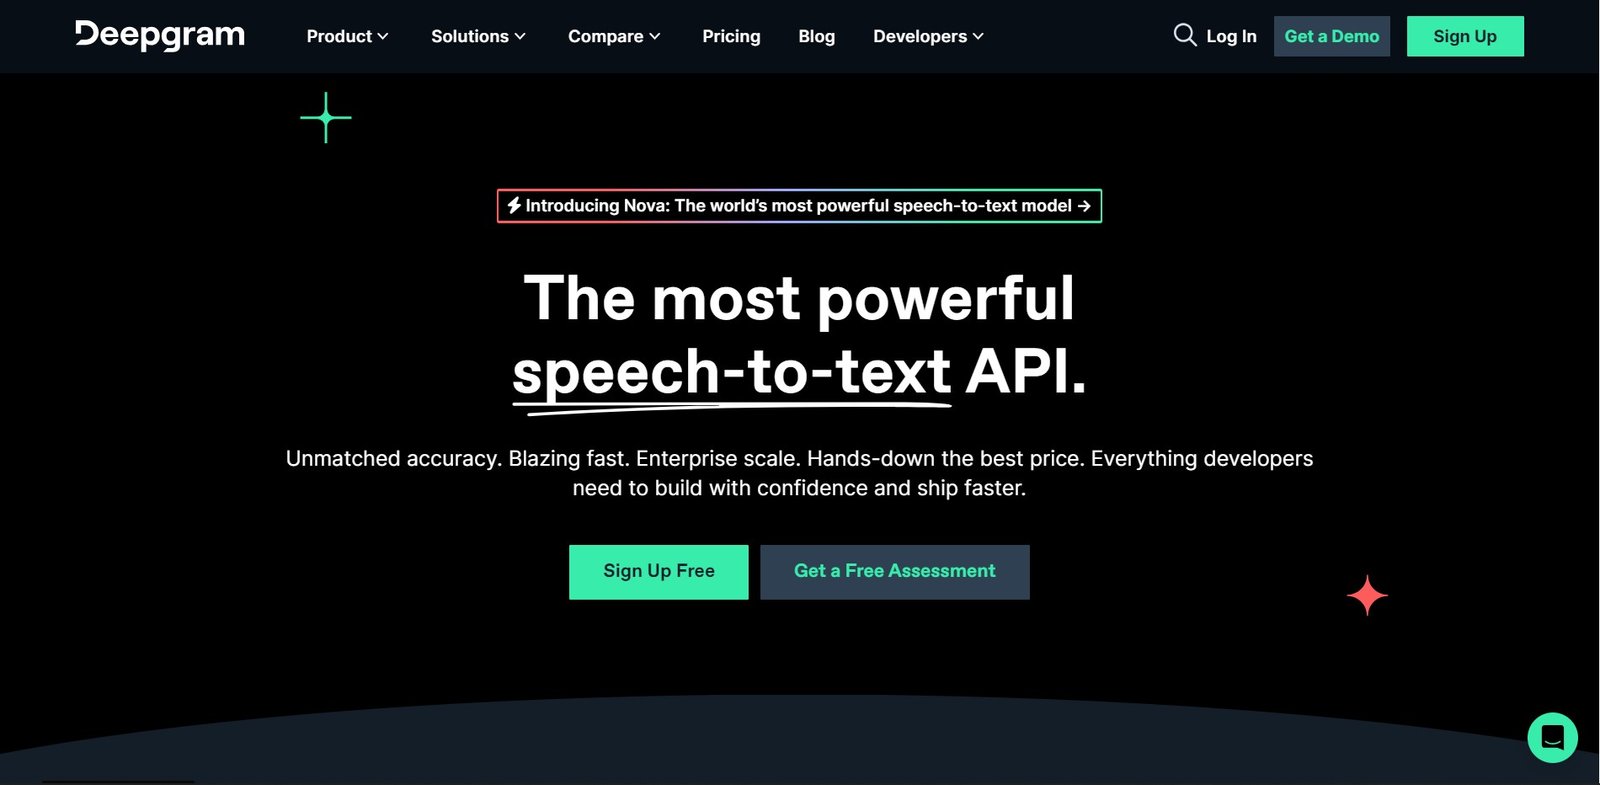 DeepGram is a powerful AI platform with API for fast